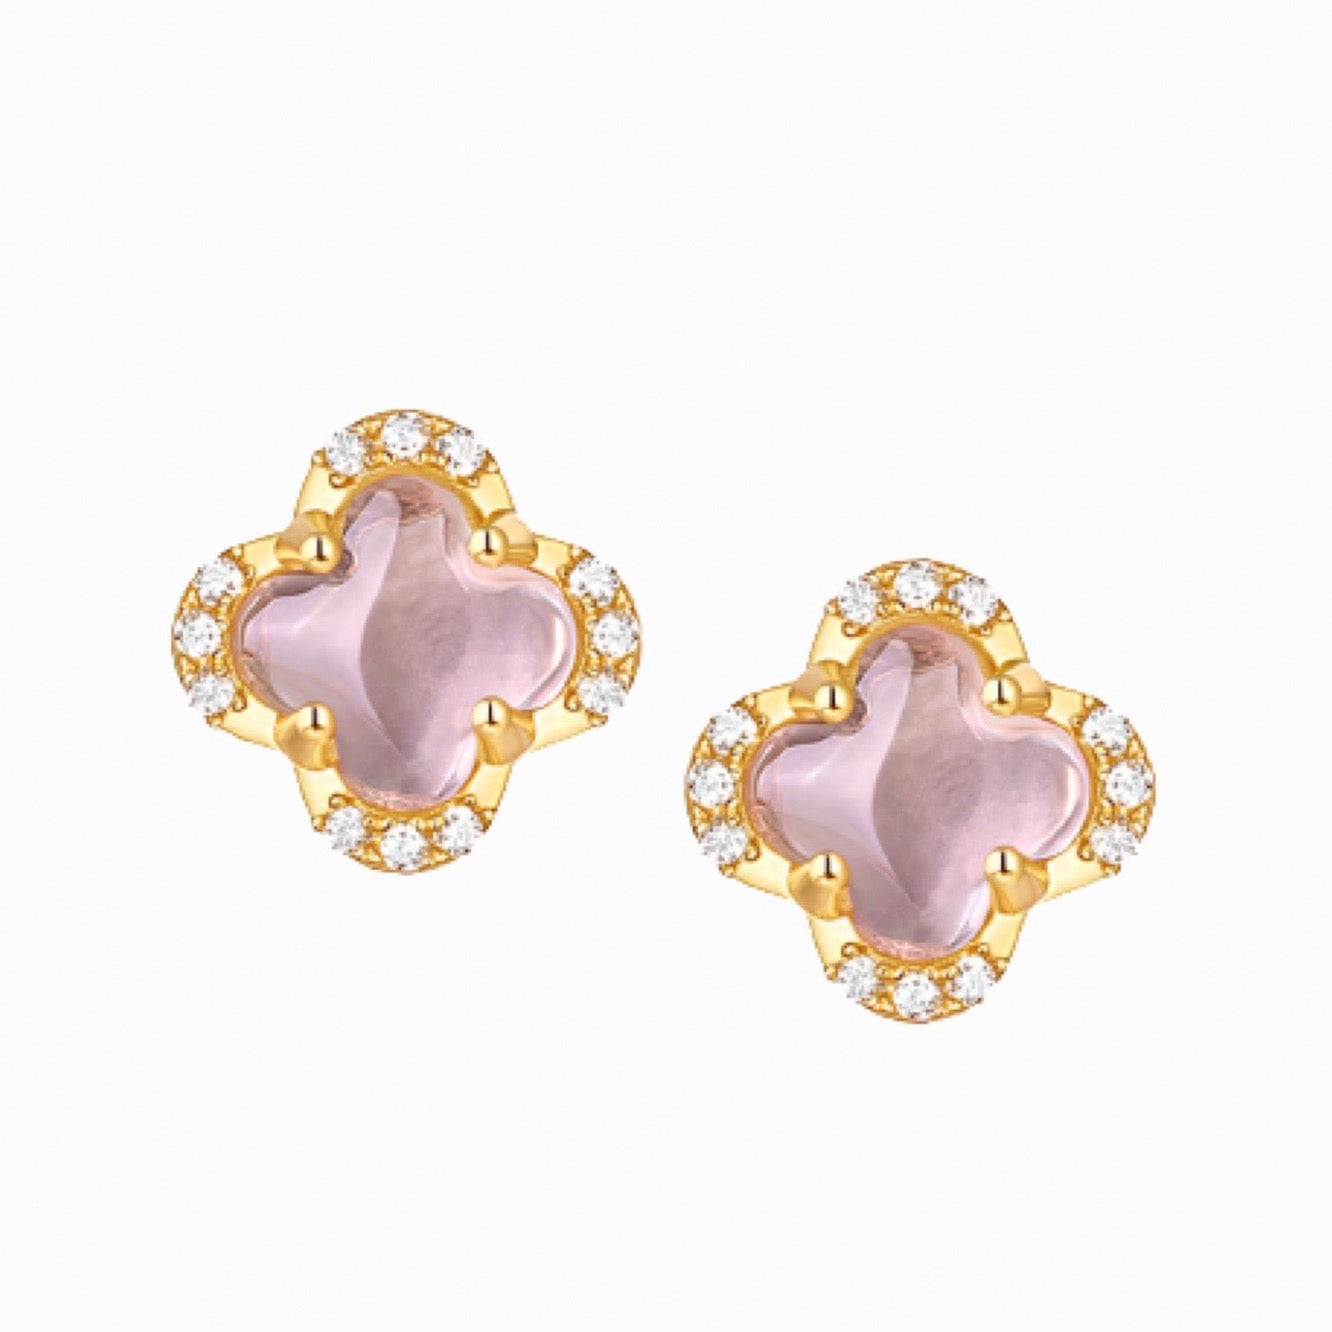 Four Leaf Clover Earrings, 14ct Gold Plate